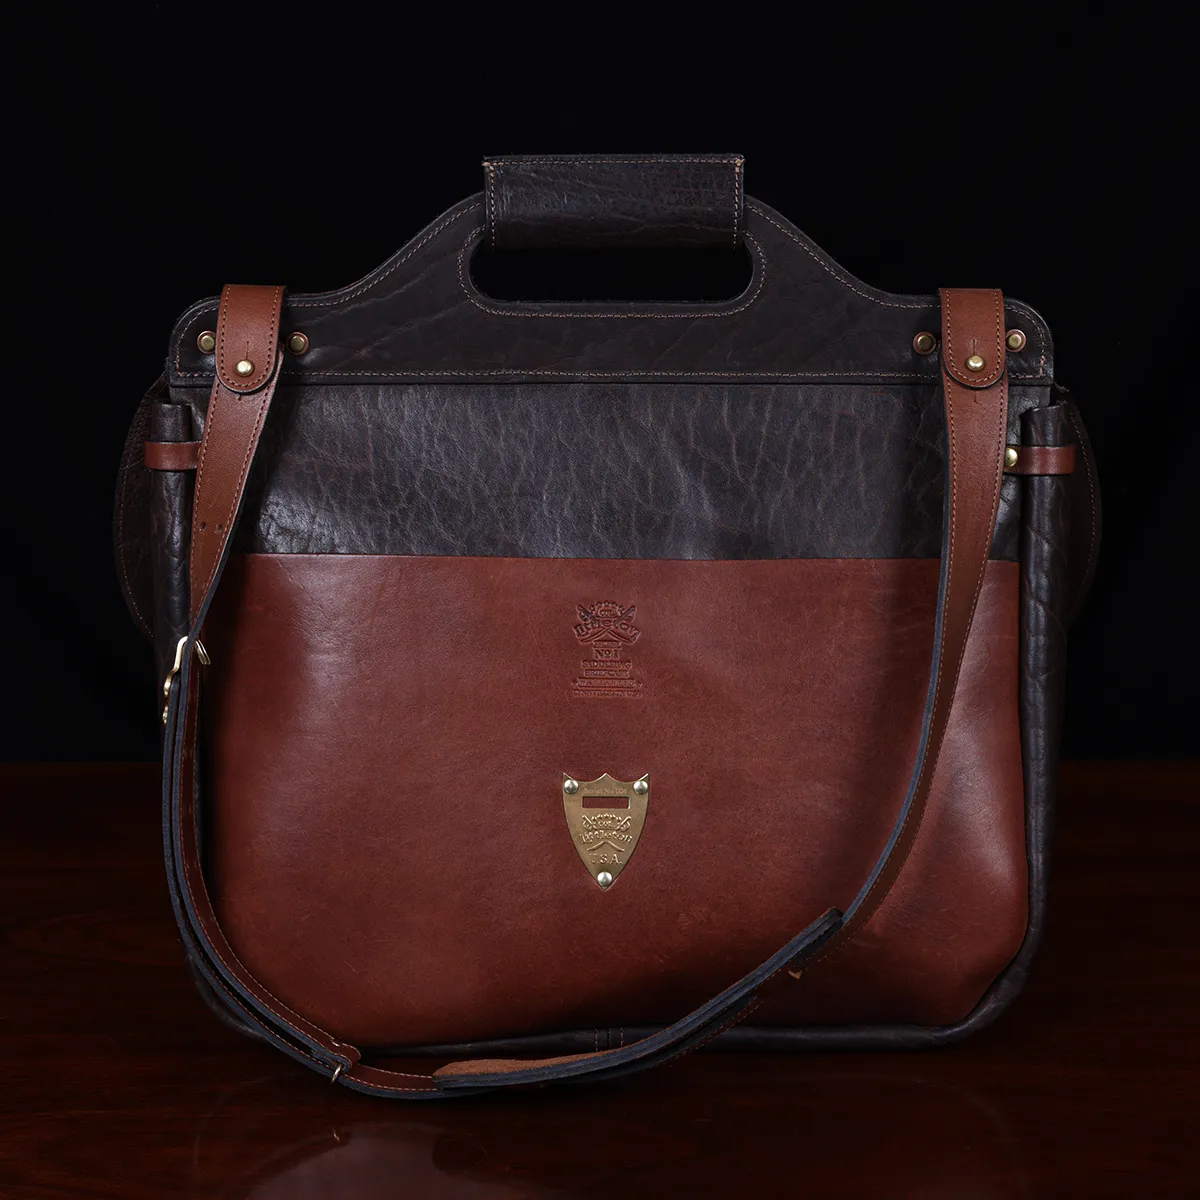 No. 1 Saddlebag Briefcase in dark Tobacco Brown American Buffalo trimmed with Alligator - serial number 004 - back view